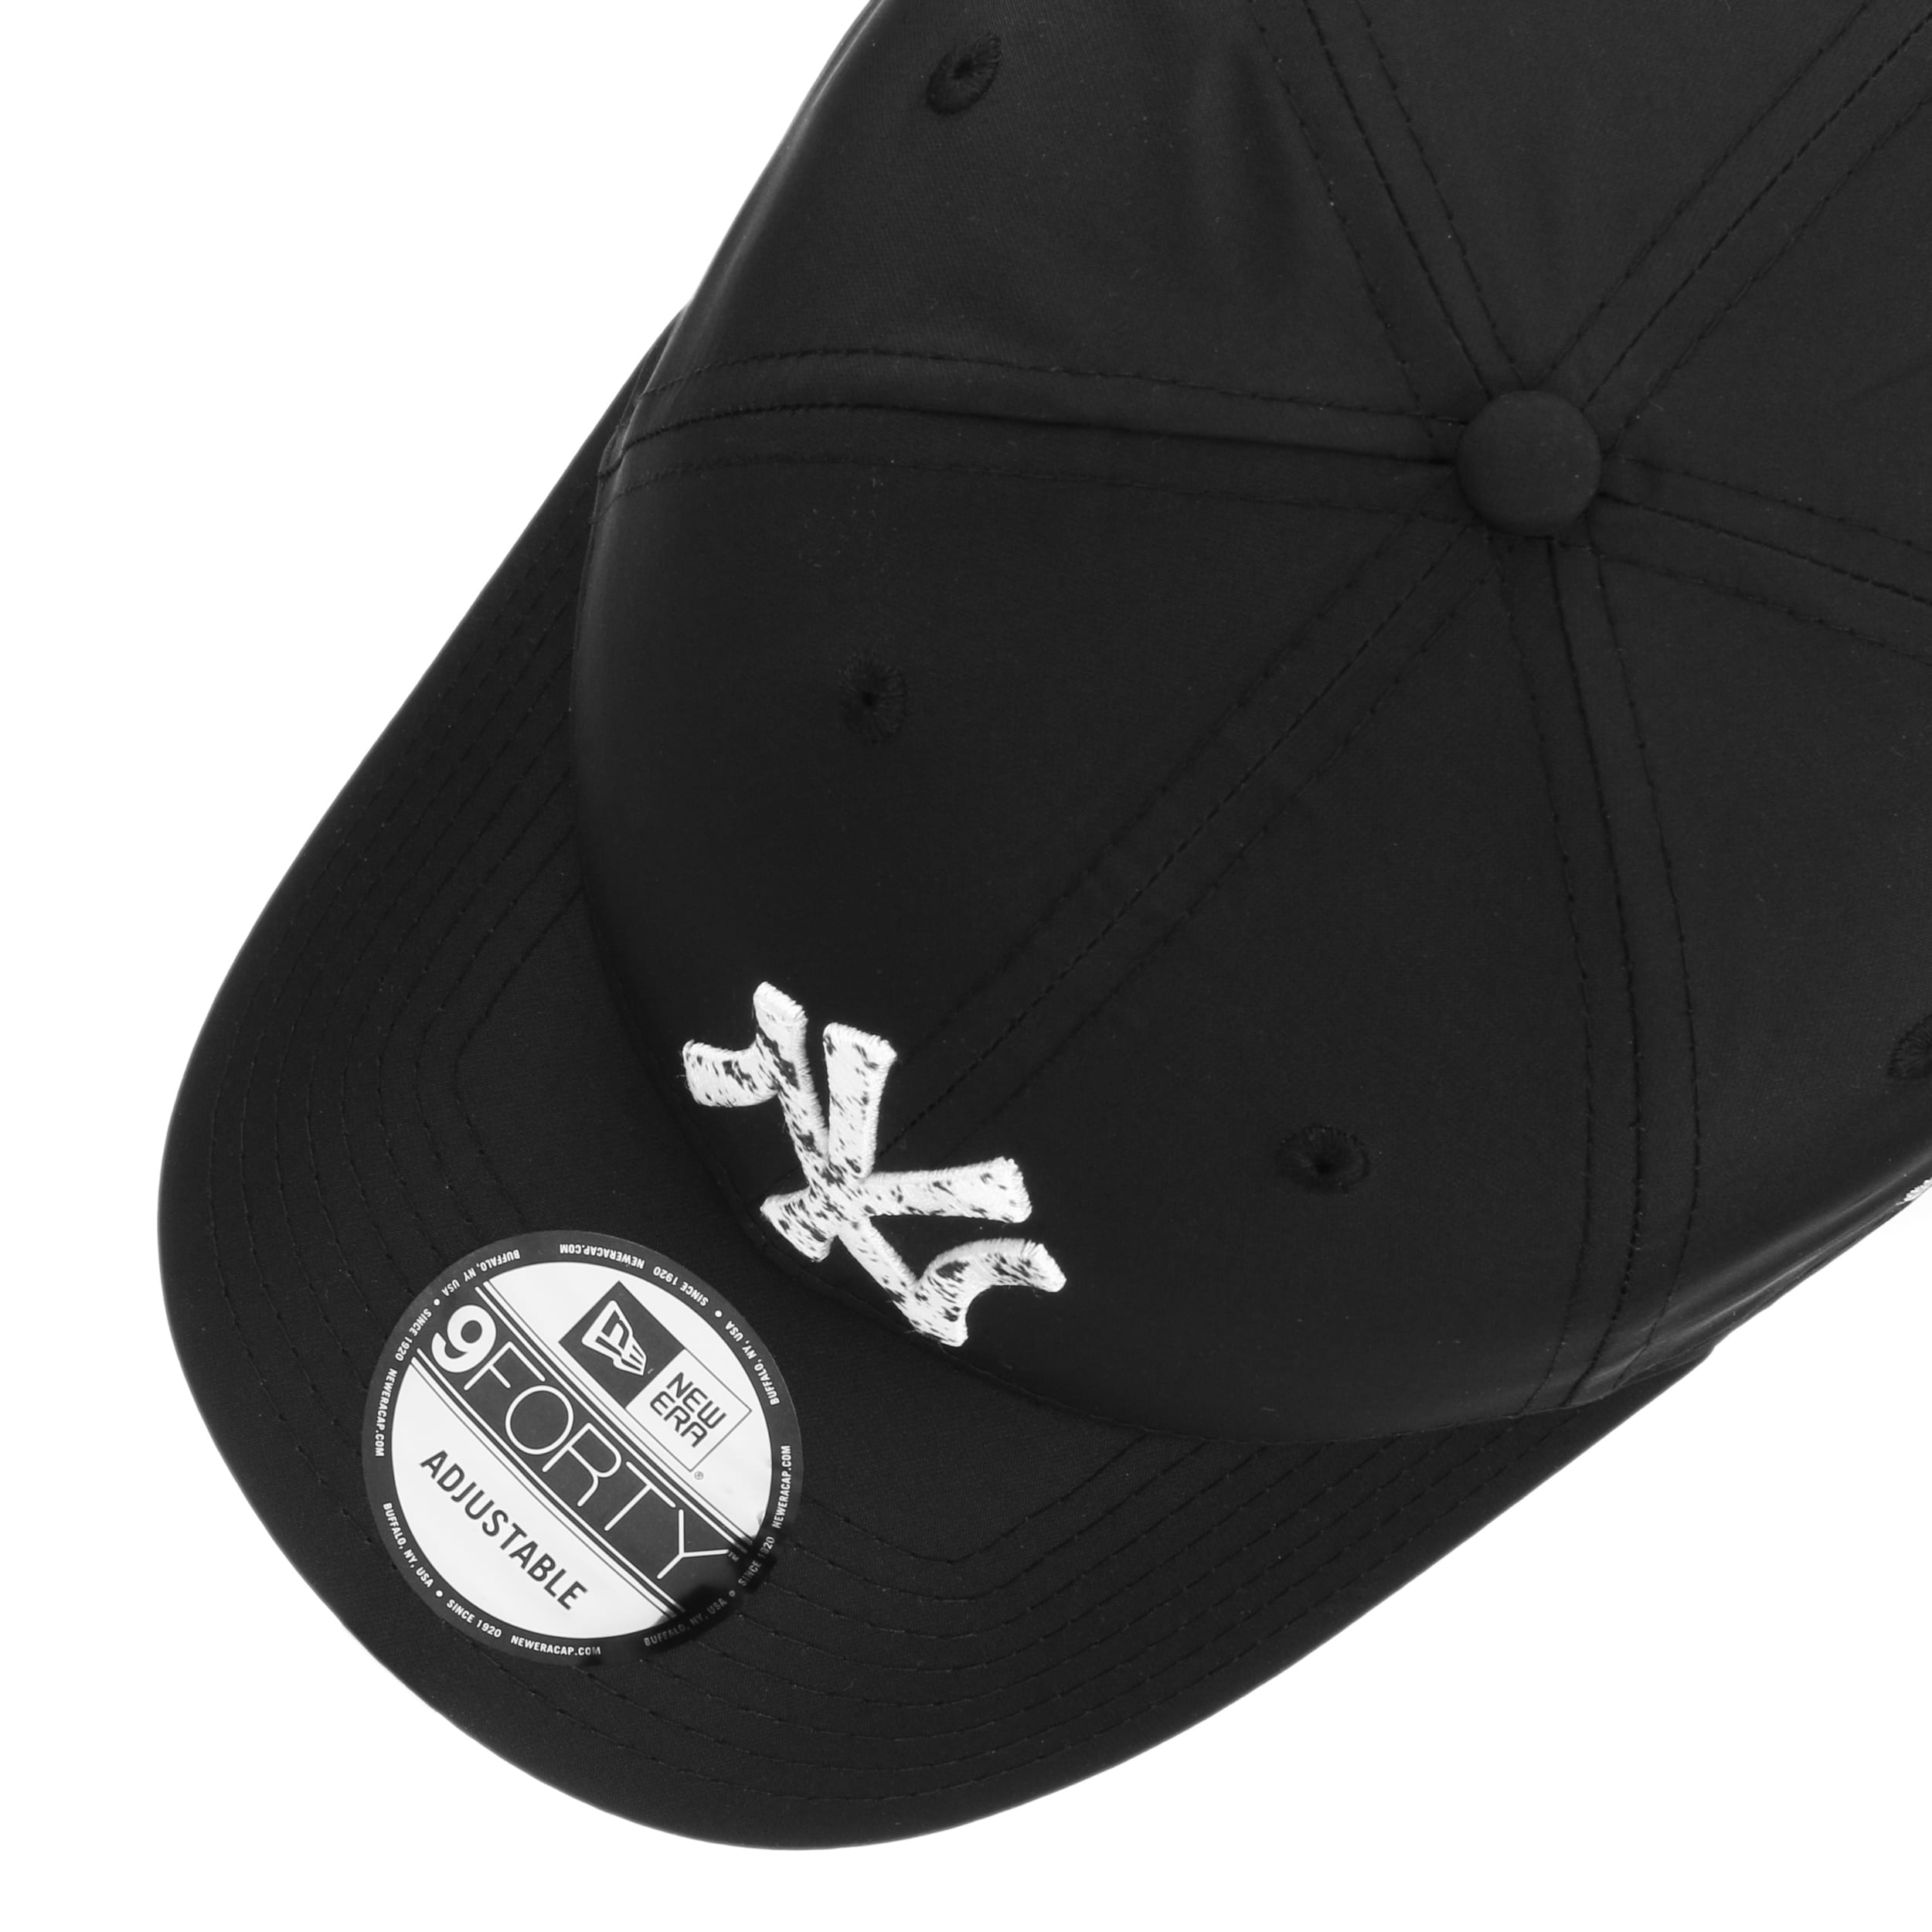 Casquettes, New Era - Casquette Ny Yankees 9Forty - Noir